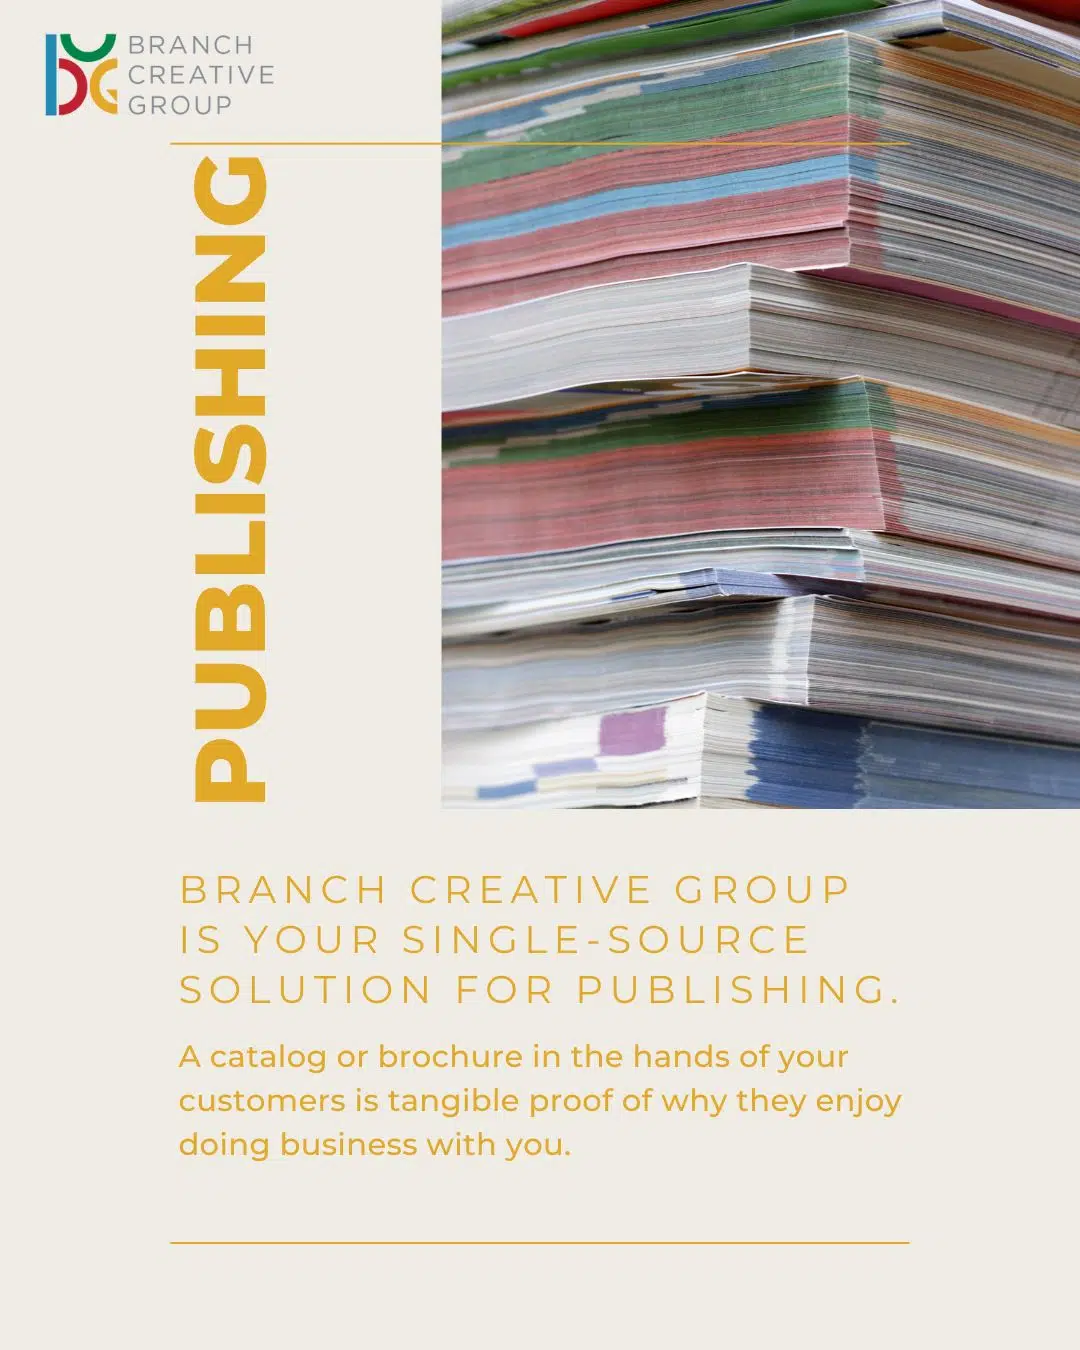 Branch Creative Group is your single-source solution for publishing. A catalog or brochure in the hands of your customers is tangible proof of why they enjoy doing business with you.